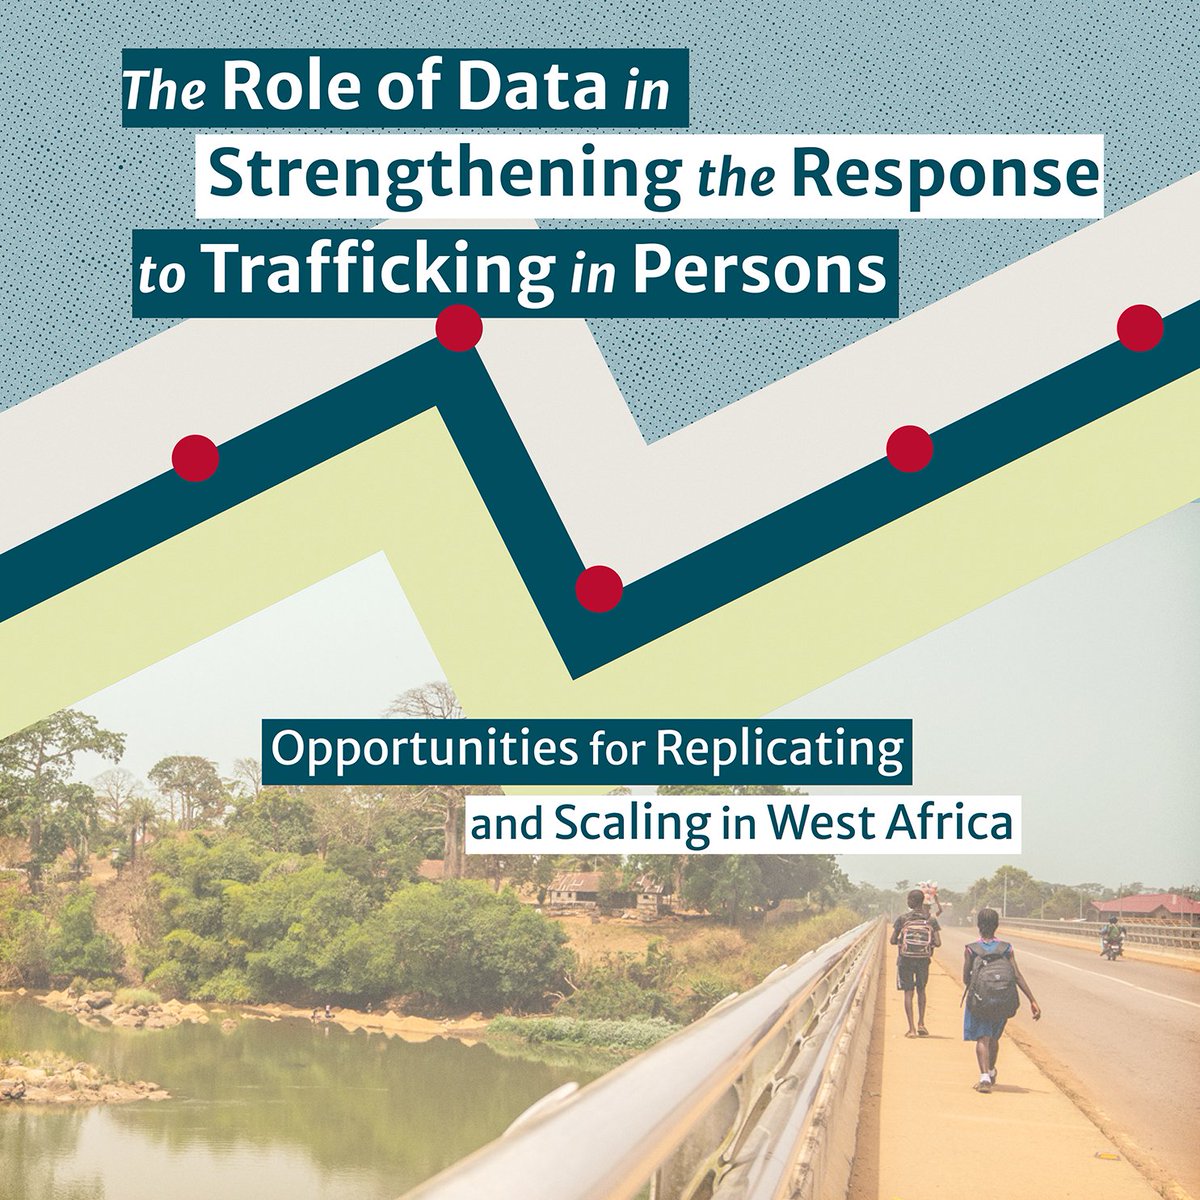 How can emerging data-driven technologies improve the global response to #EndHumanTrafficking? 🔎 What role can innovative information technologies play in combating trafficking in persons in West Africa? 🌍 Our new brief analyzes the opportunities. 🔗 t.uga.edu/9p6